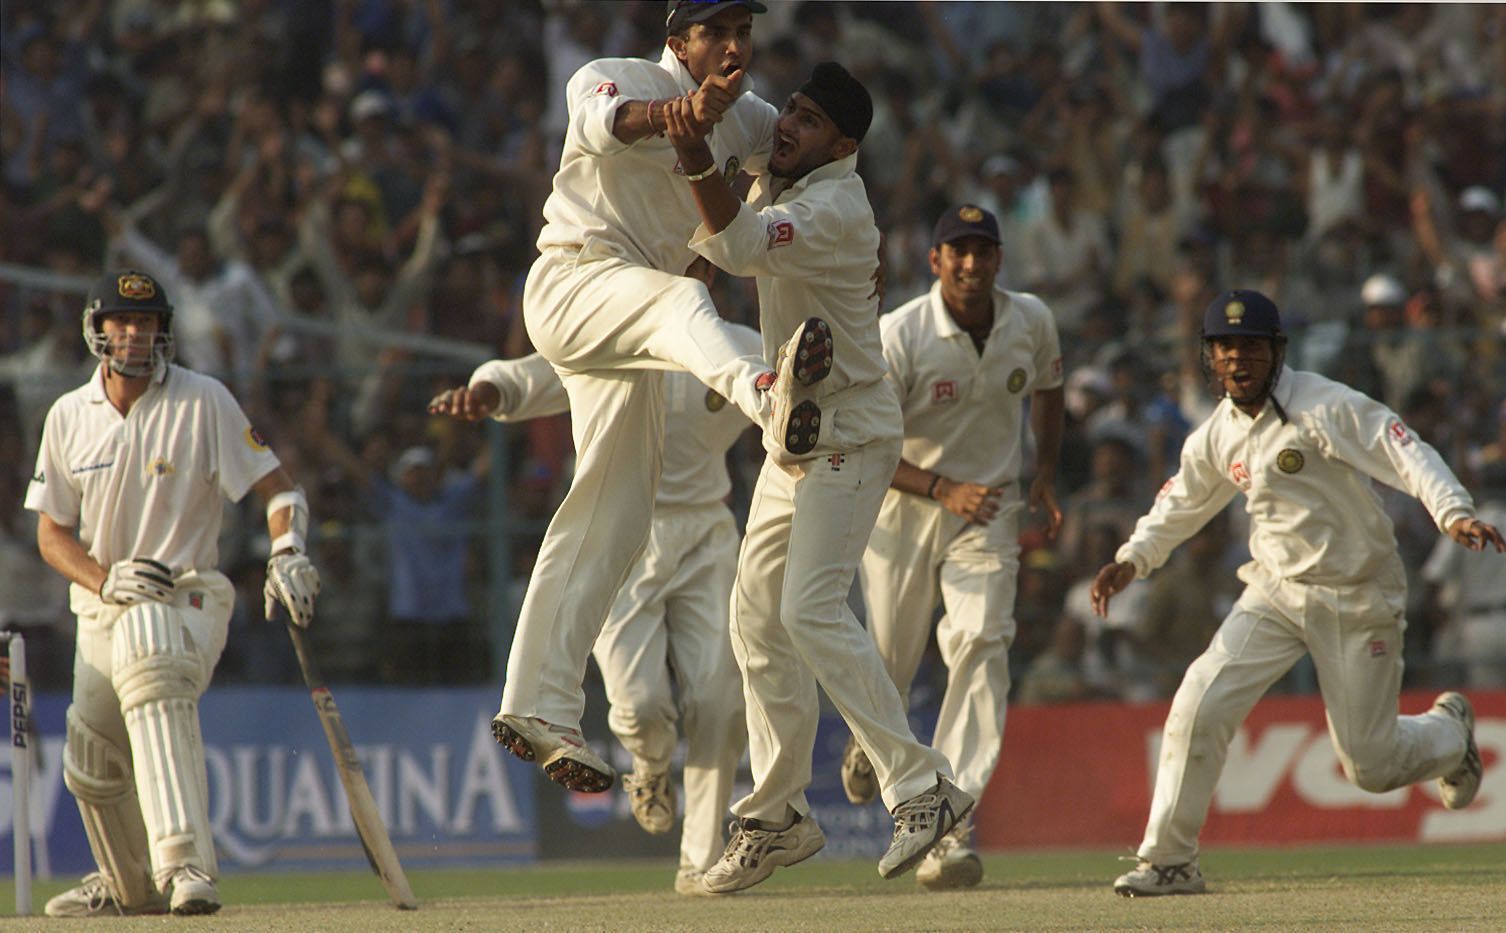 Sourav Ganguly led India to a memorable home Test series win against Australia in 2001.